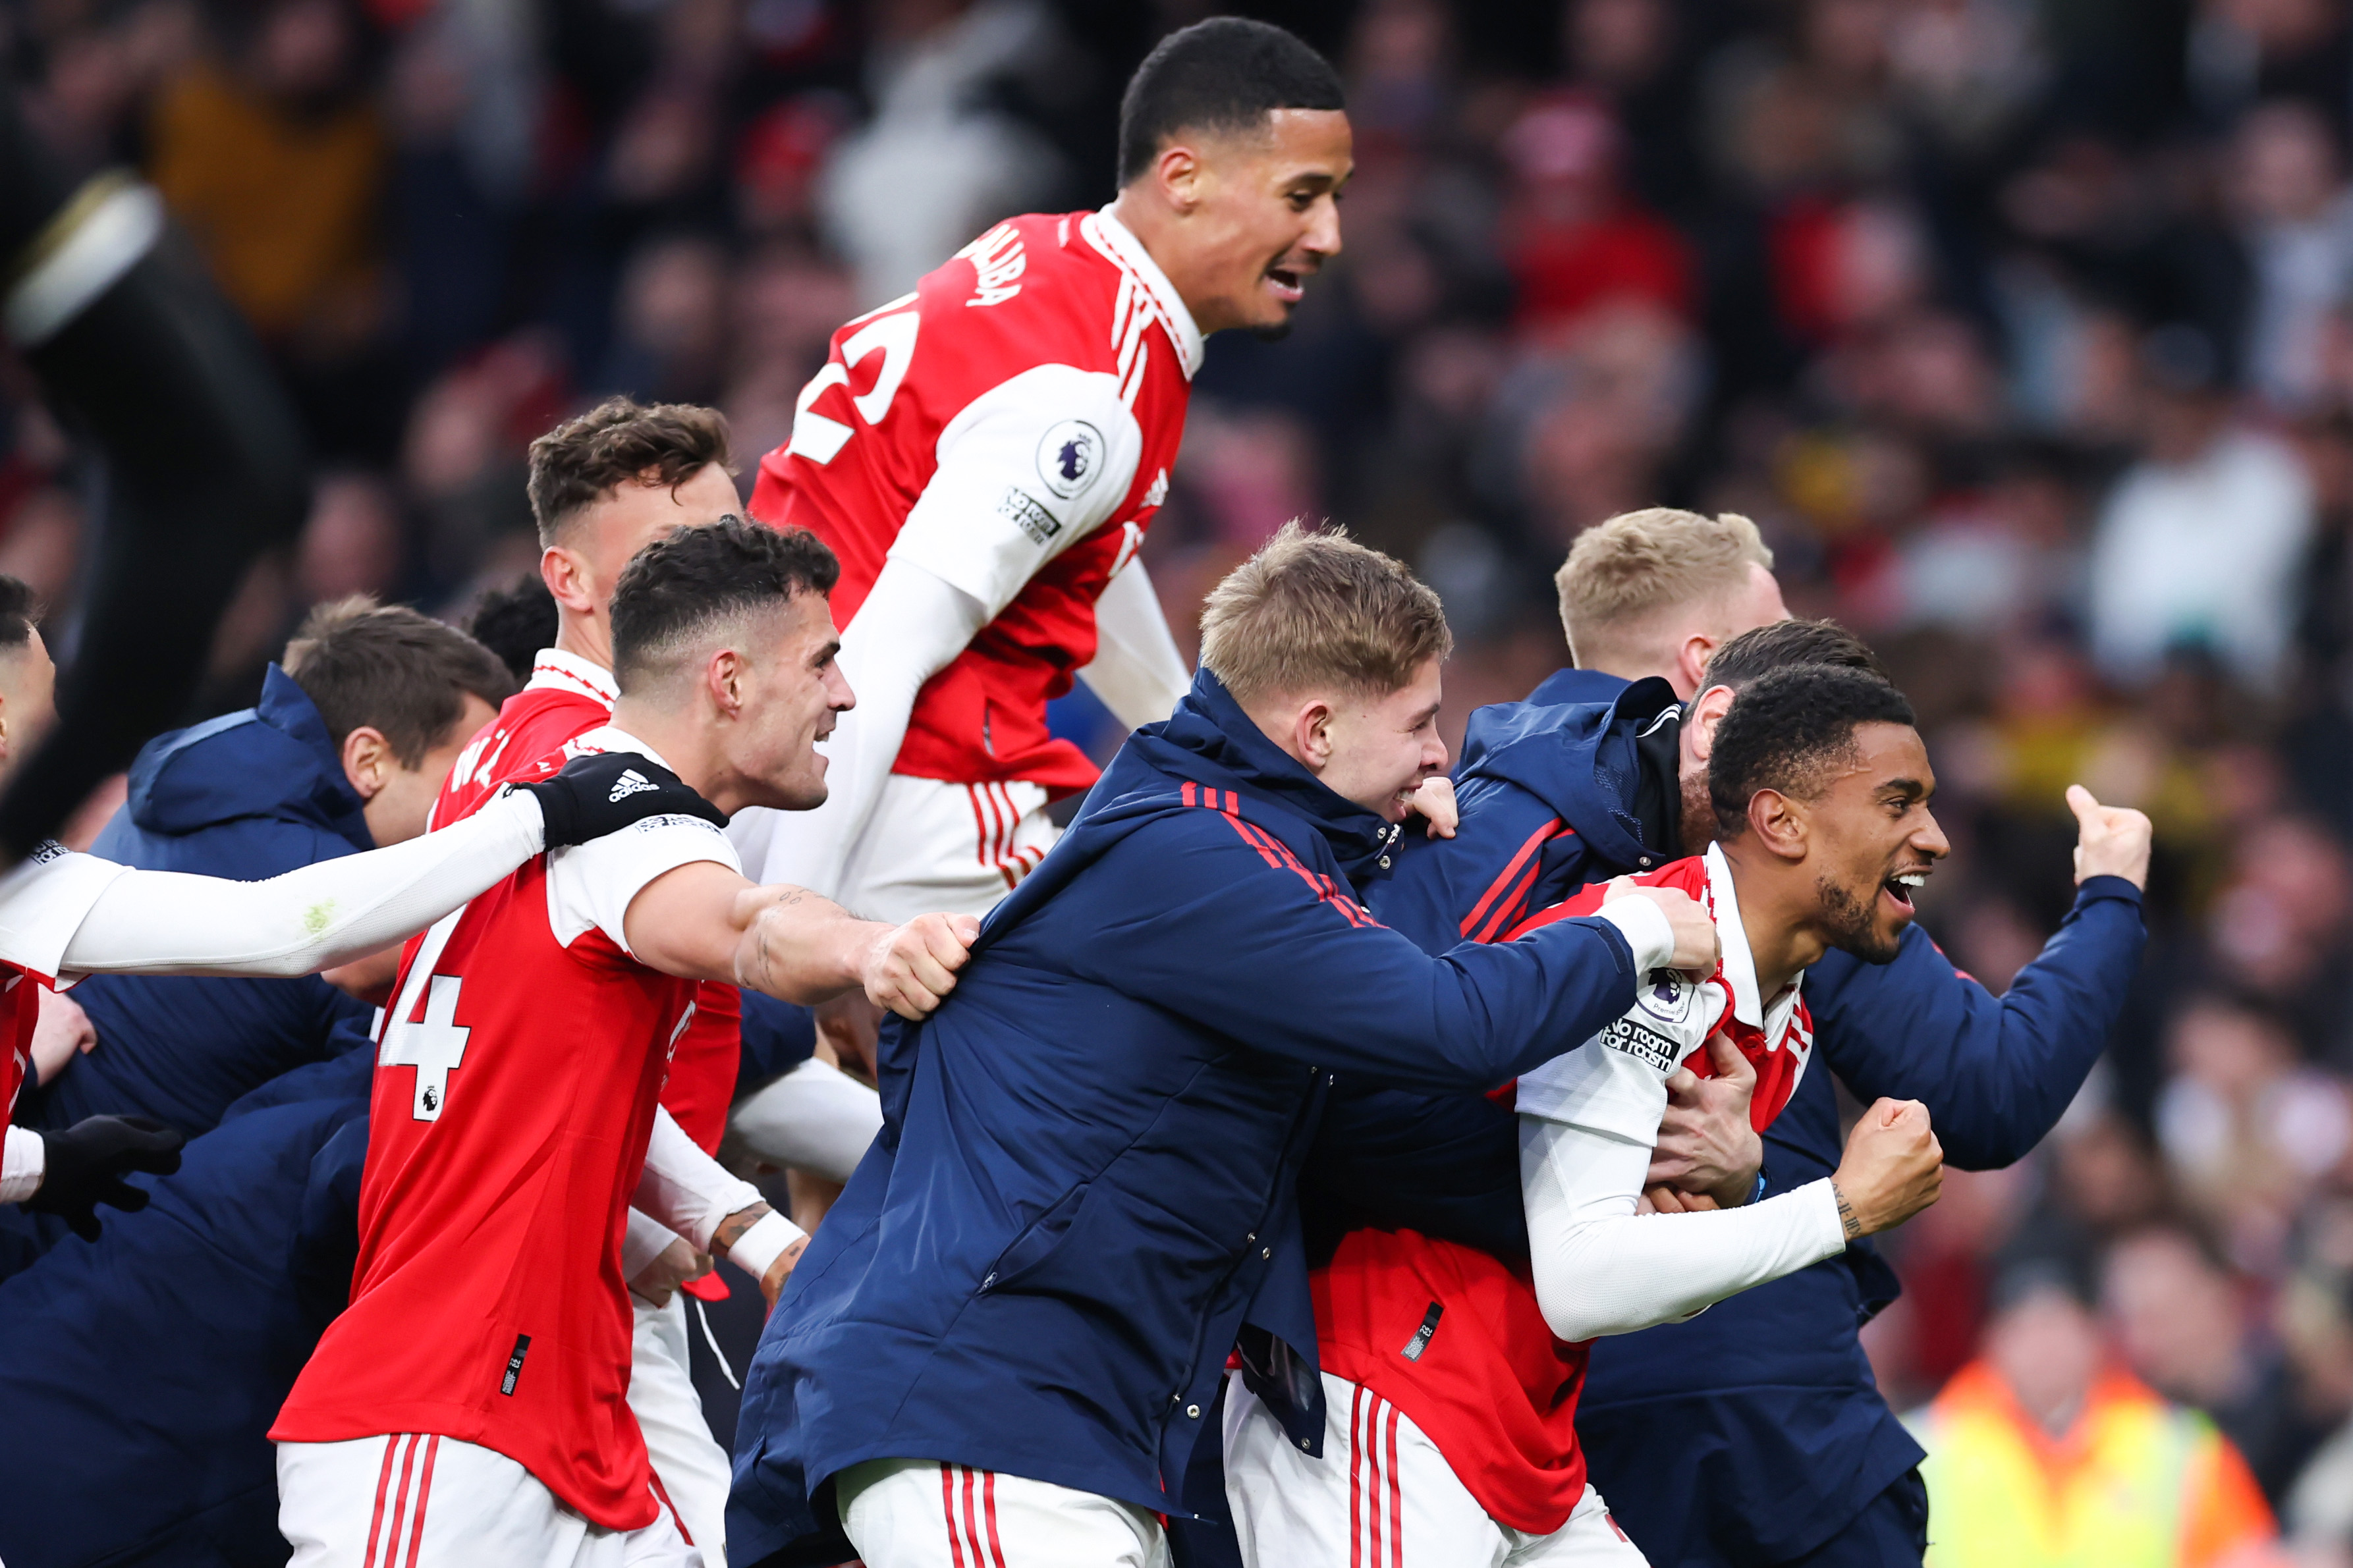 Reiss Nelson's last-gasp winner for Arsenal vs Bournemouth nominated for Premier League Goal of the Month 